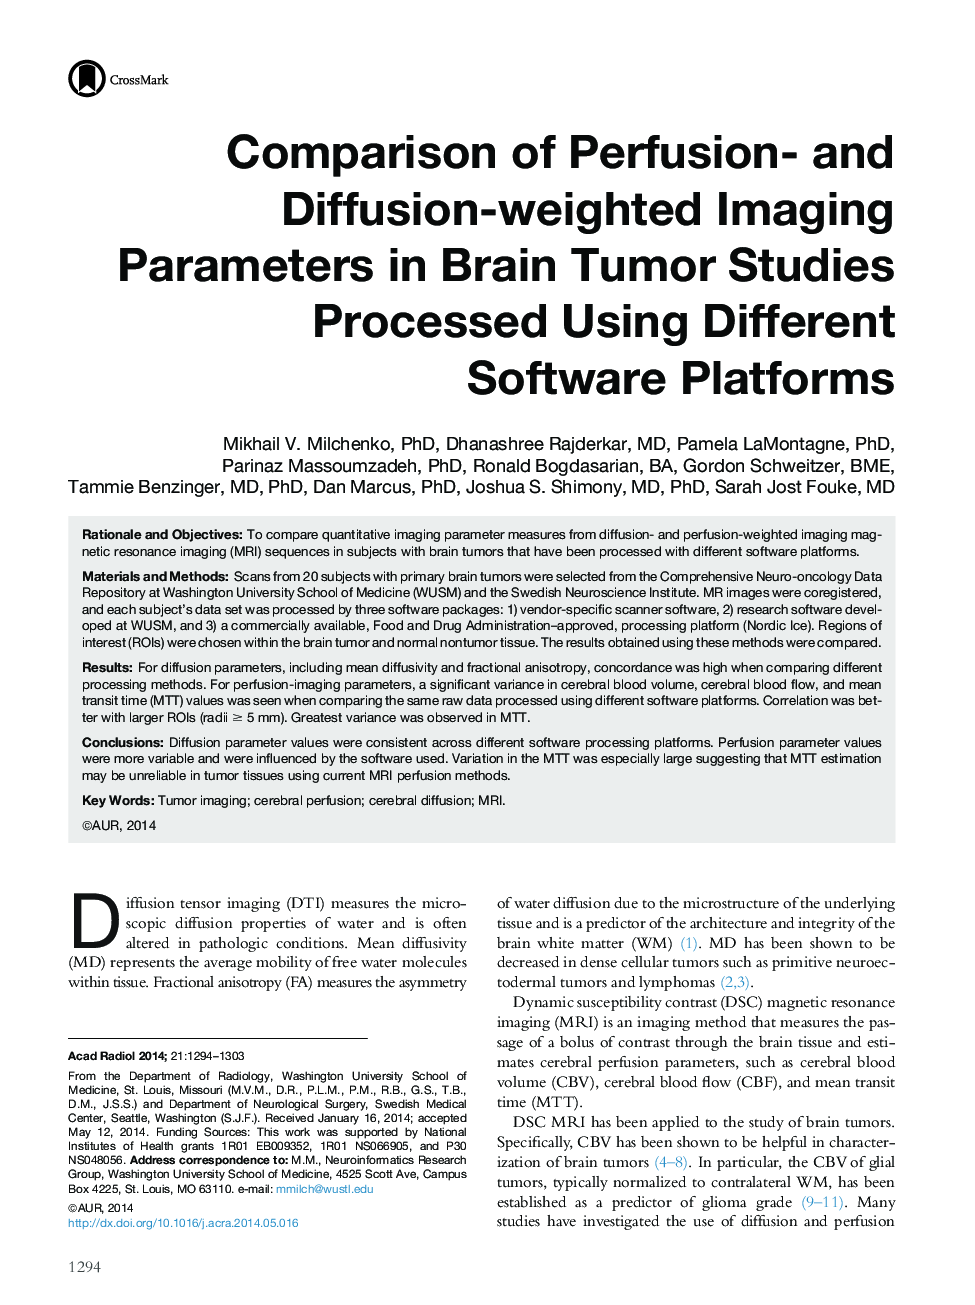 Comparison of Perfusion- and Diffusion-weighted Imaging Parameters in Brain Tumor Studies Processed Using Different Software Platforms